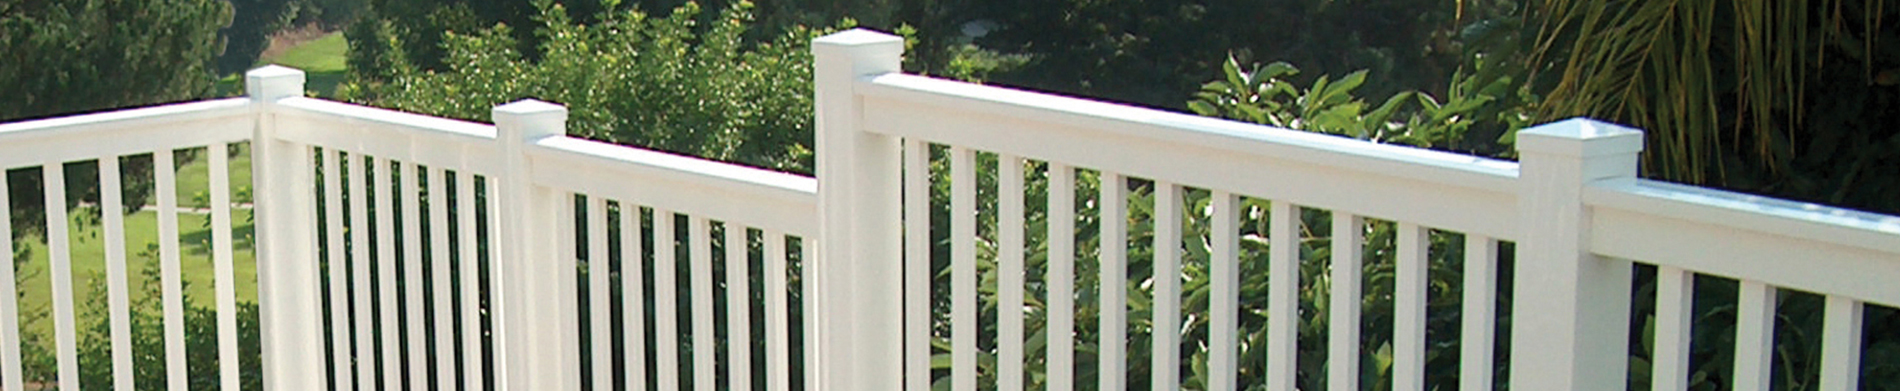 Why should you get a perimeter vinyl fence from Duramax Fences in the USA?